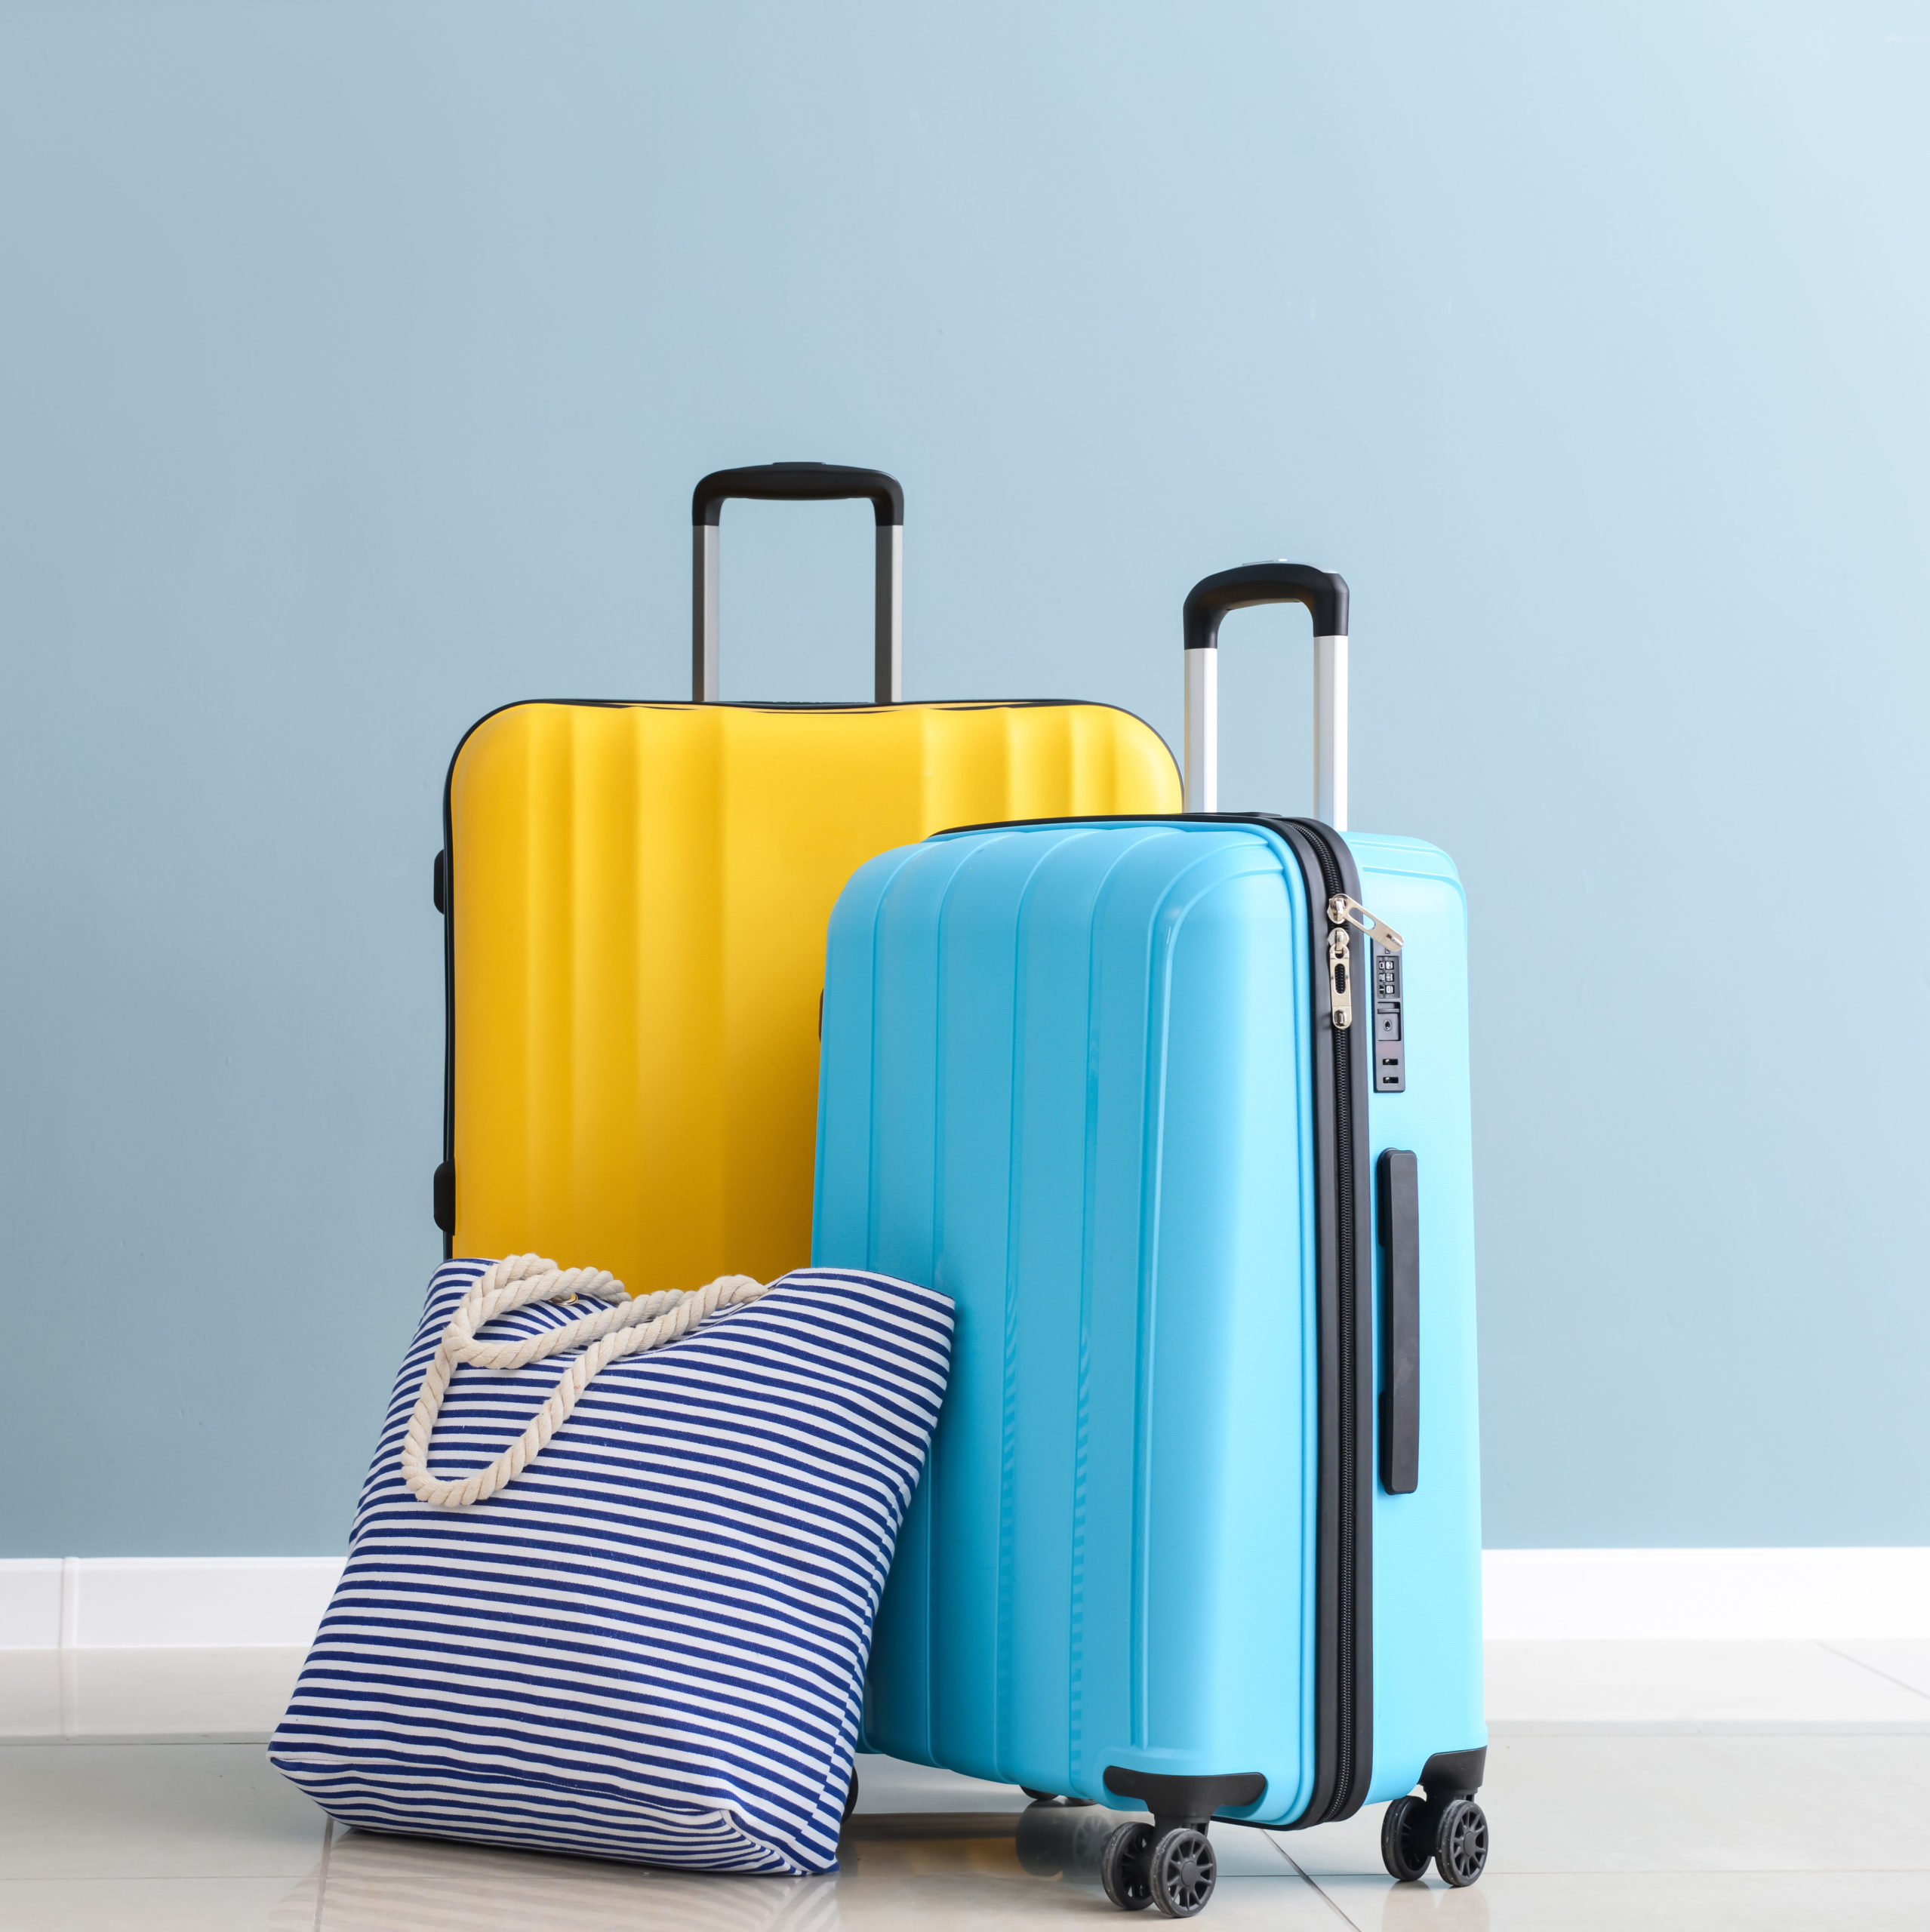 A yellow suitcase, a blue suitcase, and a striped tote bag sitting in a blue room